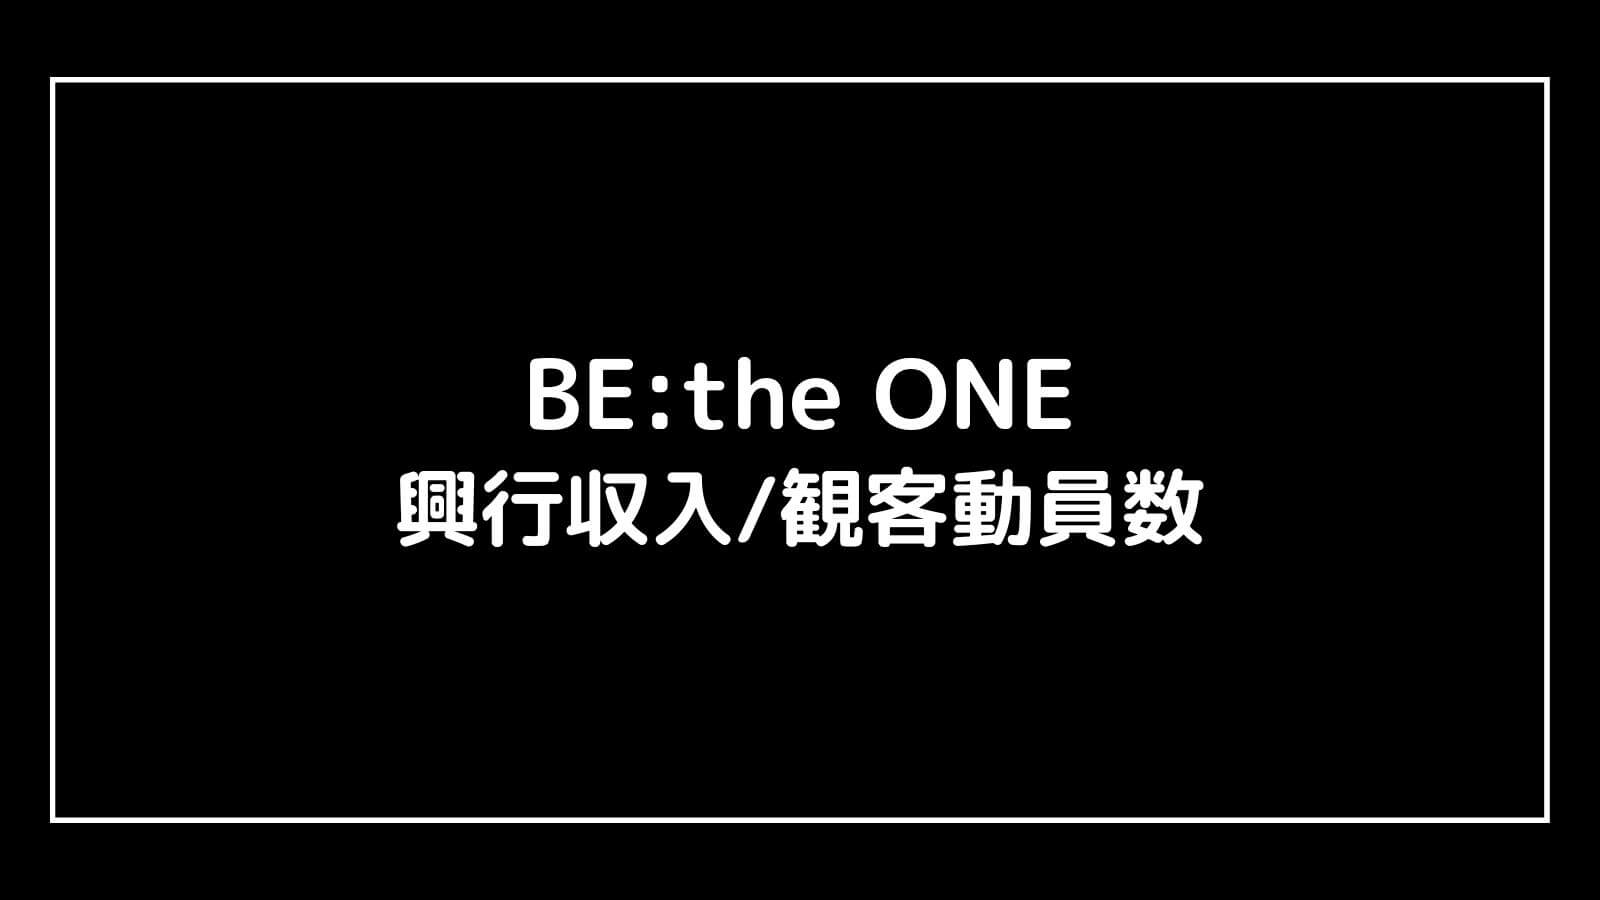 BE:the ONE｜BE:FIRSTライブ映画の興行収入と観客動員数の推移